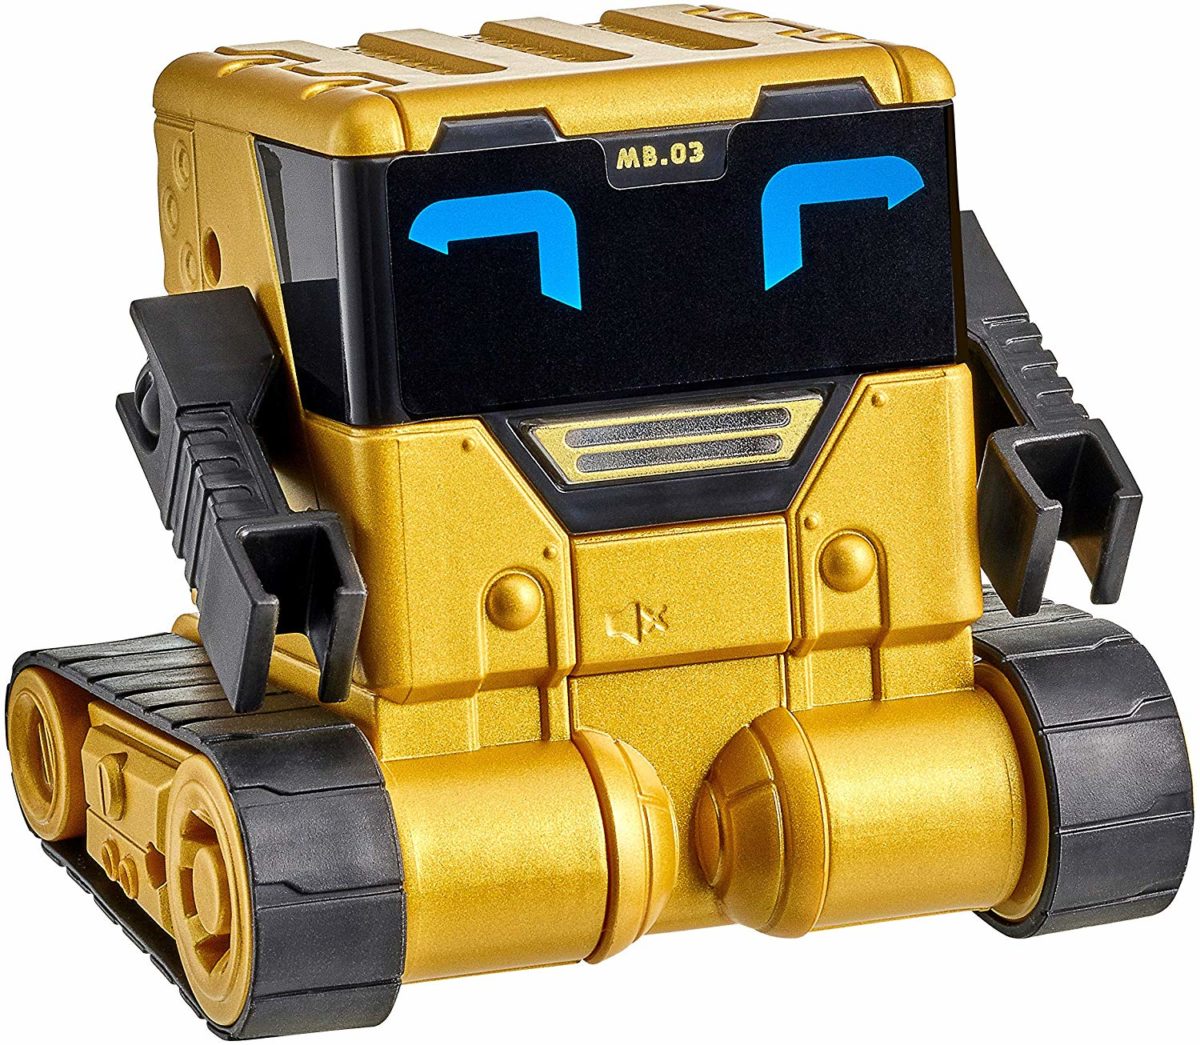 Really Rad Robots Mibro Gold - Top Toys and Gifts for Five Year Old Boys 1